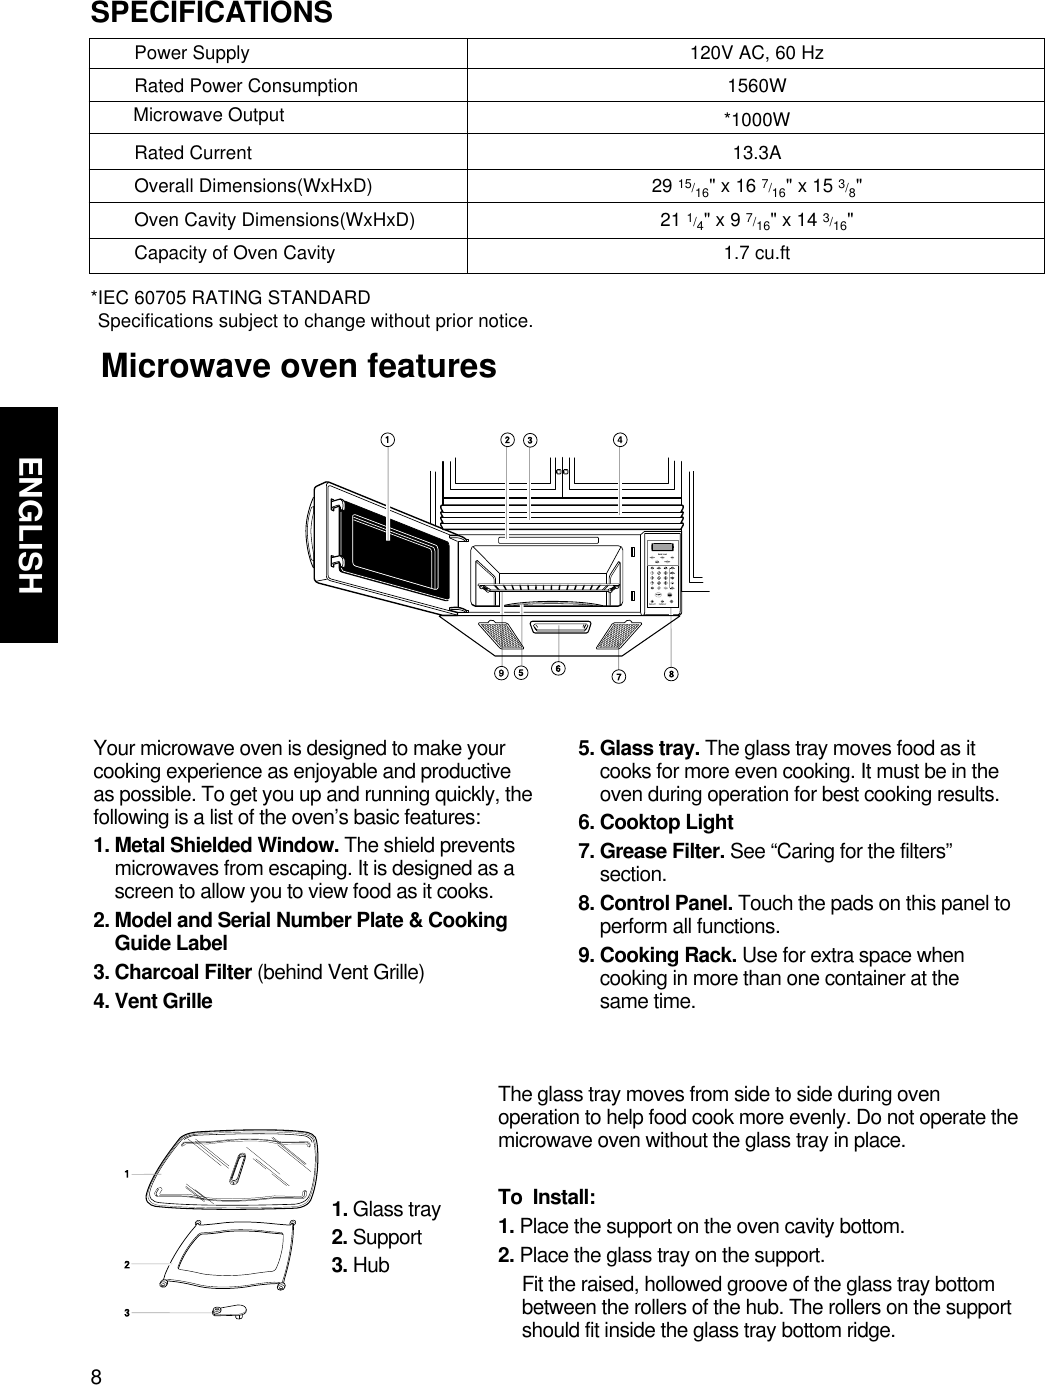 8ENGLISHGETTING TO KNOW YOUR MICROWAVE OVEN    Microwave oven featuresYour microwave oven is designed to make yourcooking experience as enjoyable and productiveas possible. To get you up and running quickly, thefollowing is a list of the oven’s basic features:1. Metal Shielded Window. The shield preventsmicrowaves from escaping. It is designed as ascreen to allow you to view food as it cooks.2. Model and Serial Number Plate &amp; CookingGuide Label3. Charcoal Filter (behind Vent Grille)4. Vent Grille5. Glass tray. The glass tray moves food as itcooks for more even cooking. It must be in theoven during operation for best cooking results.6. Cooktop Light7. Grease Filter. See “Caring for the filters”section.8. Control Panel. Touch the pads on this panel toperform all functions.9. Cooking Rack. Use for extra space whencooking in more than one container at the same time.The glass tray moves from side to side during ovenoperation to help food cook more evenly. Do not operate themicrowave oven without the glass tray in place. To  Install:1. Place the support on the oven cavity bottom.2. Place the glass tray on the support.Fit the raised, hollowed groove of the glass tray bottombetween the rollers of the hub. The rollers on the supportshould fit inside the glass tray bottom ridge.1. Glass tray2. Support3. HubPower SupplyRated Power ConsumptionRated CurrentOverall Dimensions(WxHxD)Oven Cavity Dimensions(WxHxD)Capacity of Oven CavitySPECIFICATIONS*IEC 60705 RATING STANDARD Specifications subject to change without prior notice.120V AC, 60 Hz1560W*1000W13.3A29 15/16&quot; x 16 7/16&quot; x 15 3/8&quot;21 1/4&quot; x 9 7/16&quot; x 14 3/16&quot;1.7 cu.ftMicrowave Output